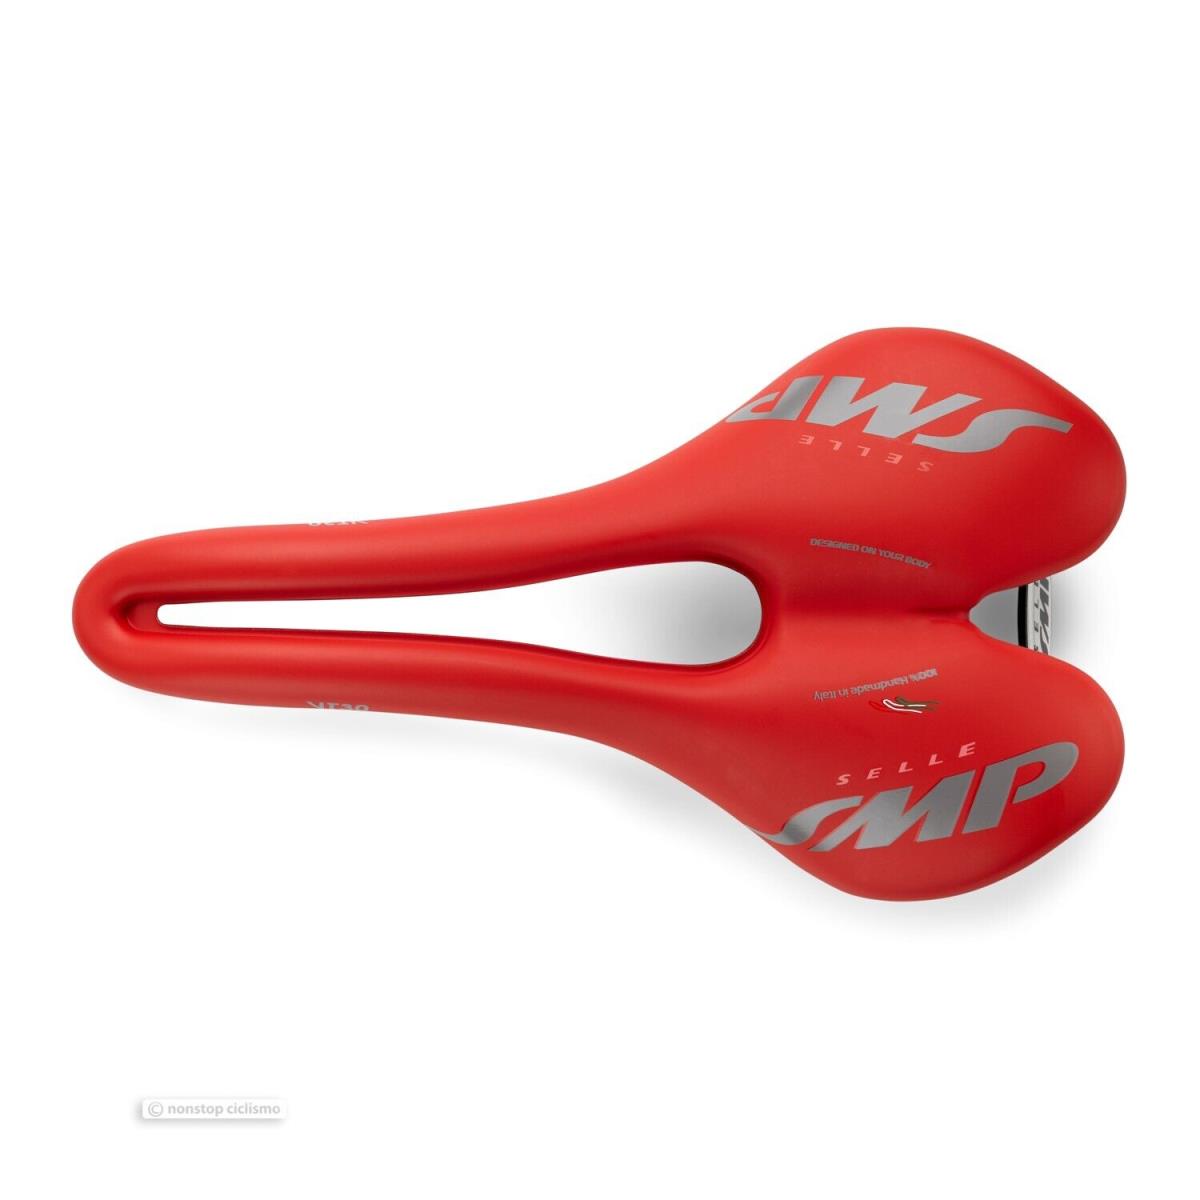 Selle Smp VT30 Saddle : Velvet Touch Red - Made IN Italy